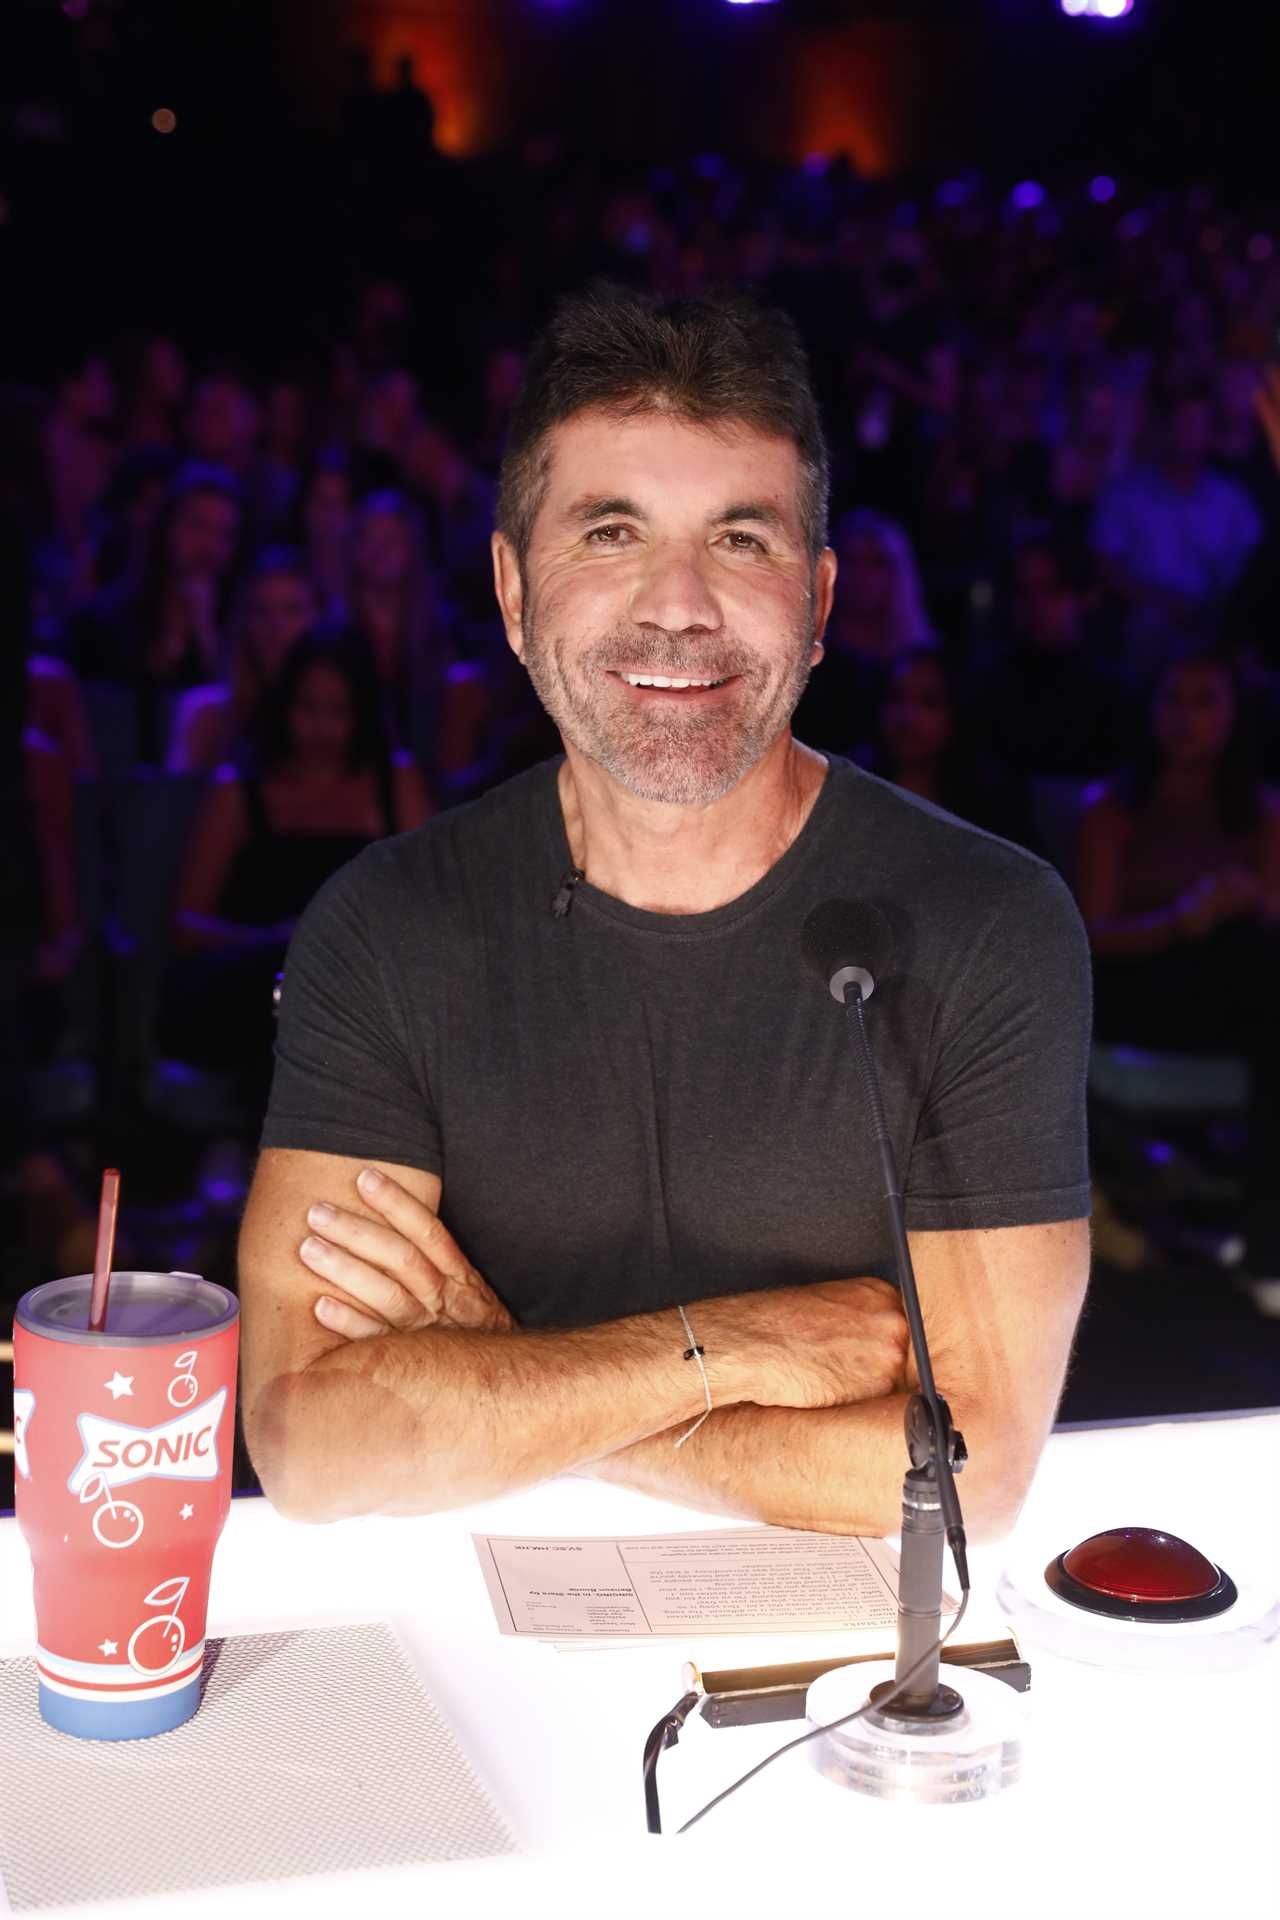 Who are the judges of America’s Got Talent?